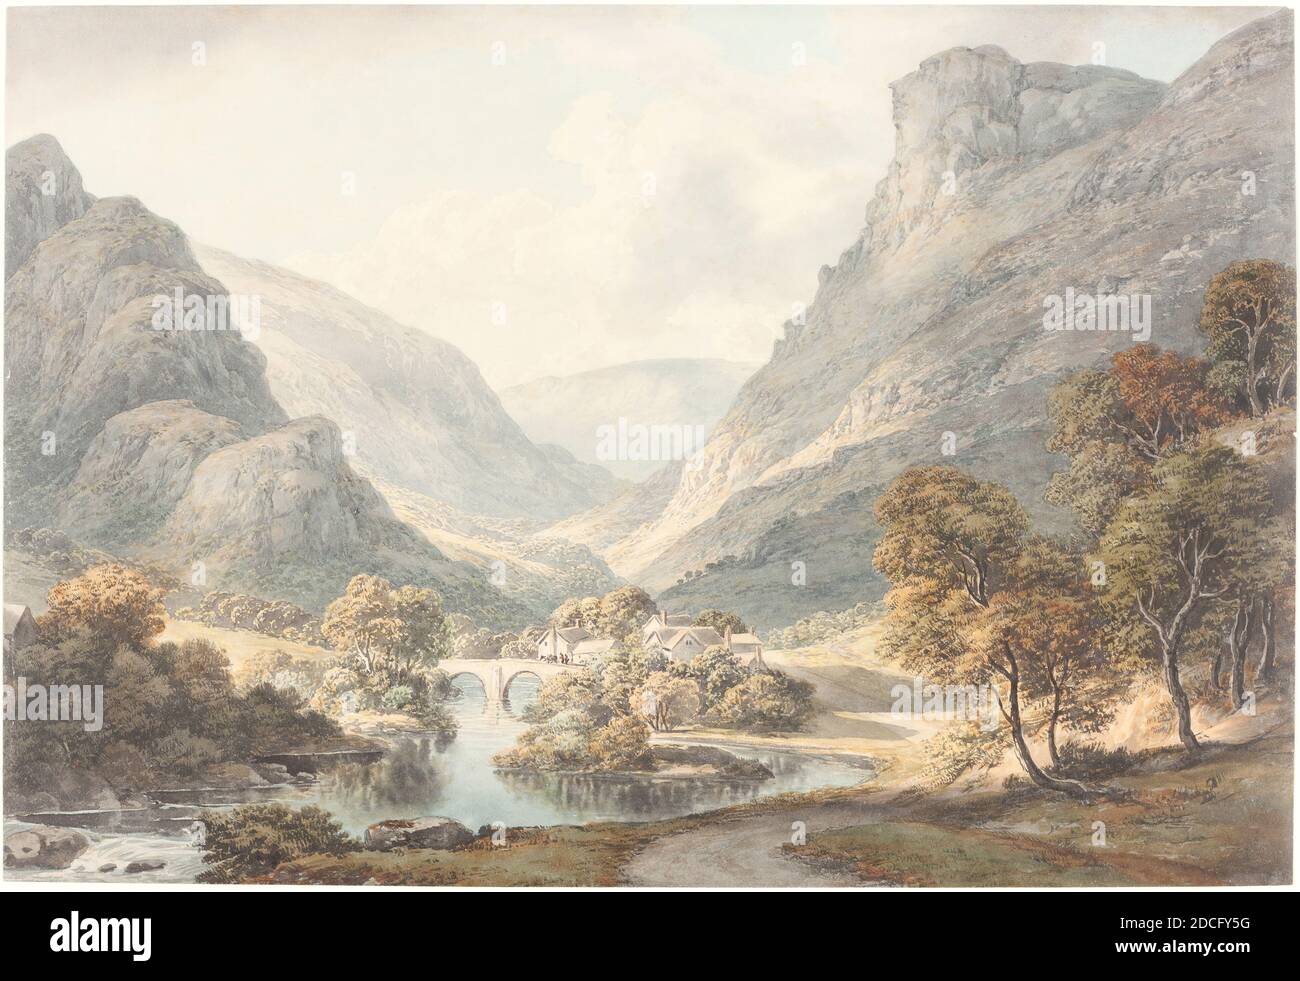 John Glover, (artist), British, 1767 - 1849, A View of Dovedale, c. 1825, watercolor over graphite on wove paper, overall: 26.3 x 38.7 cm (10 3/8 x 15 1/4 in Stock Photo